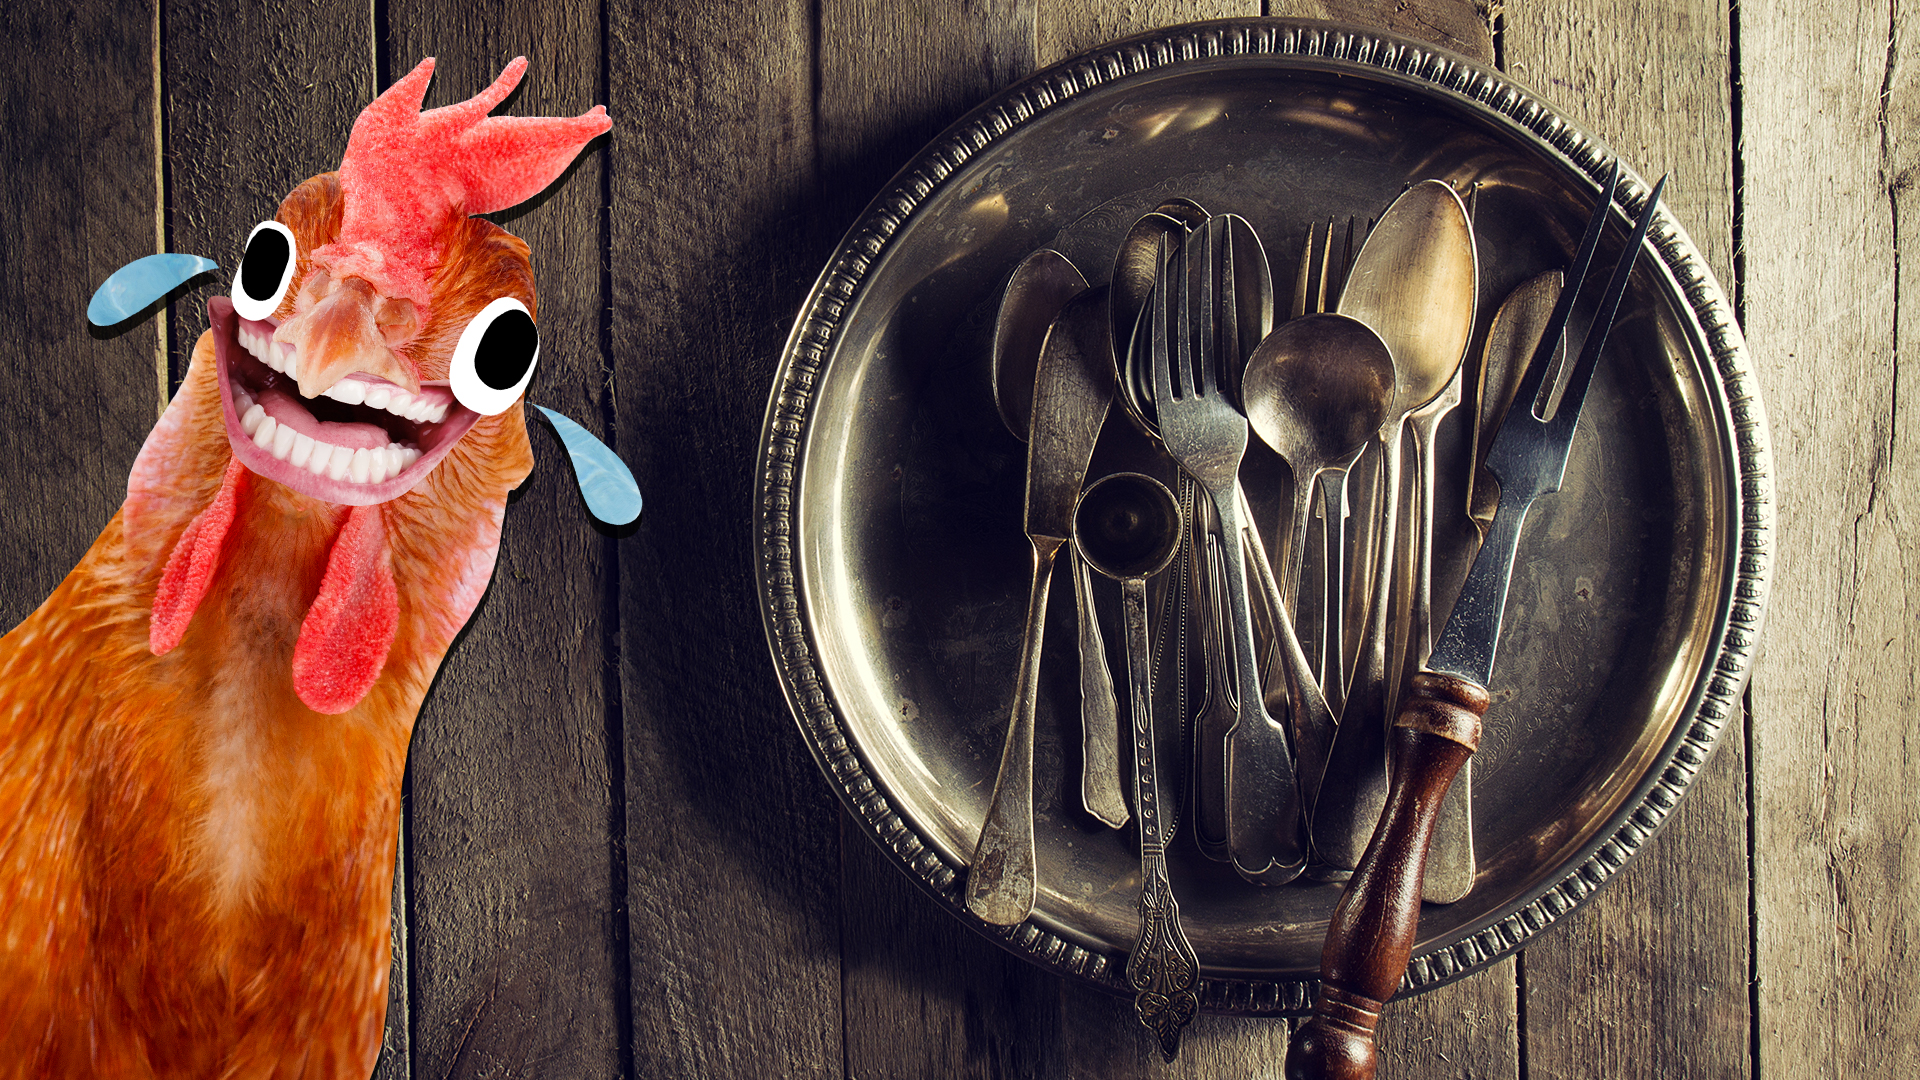 Lovin' from the Oven: The Obscure Kitchen Utensil Quiz